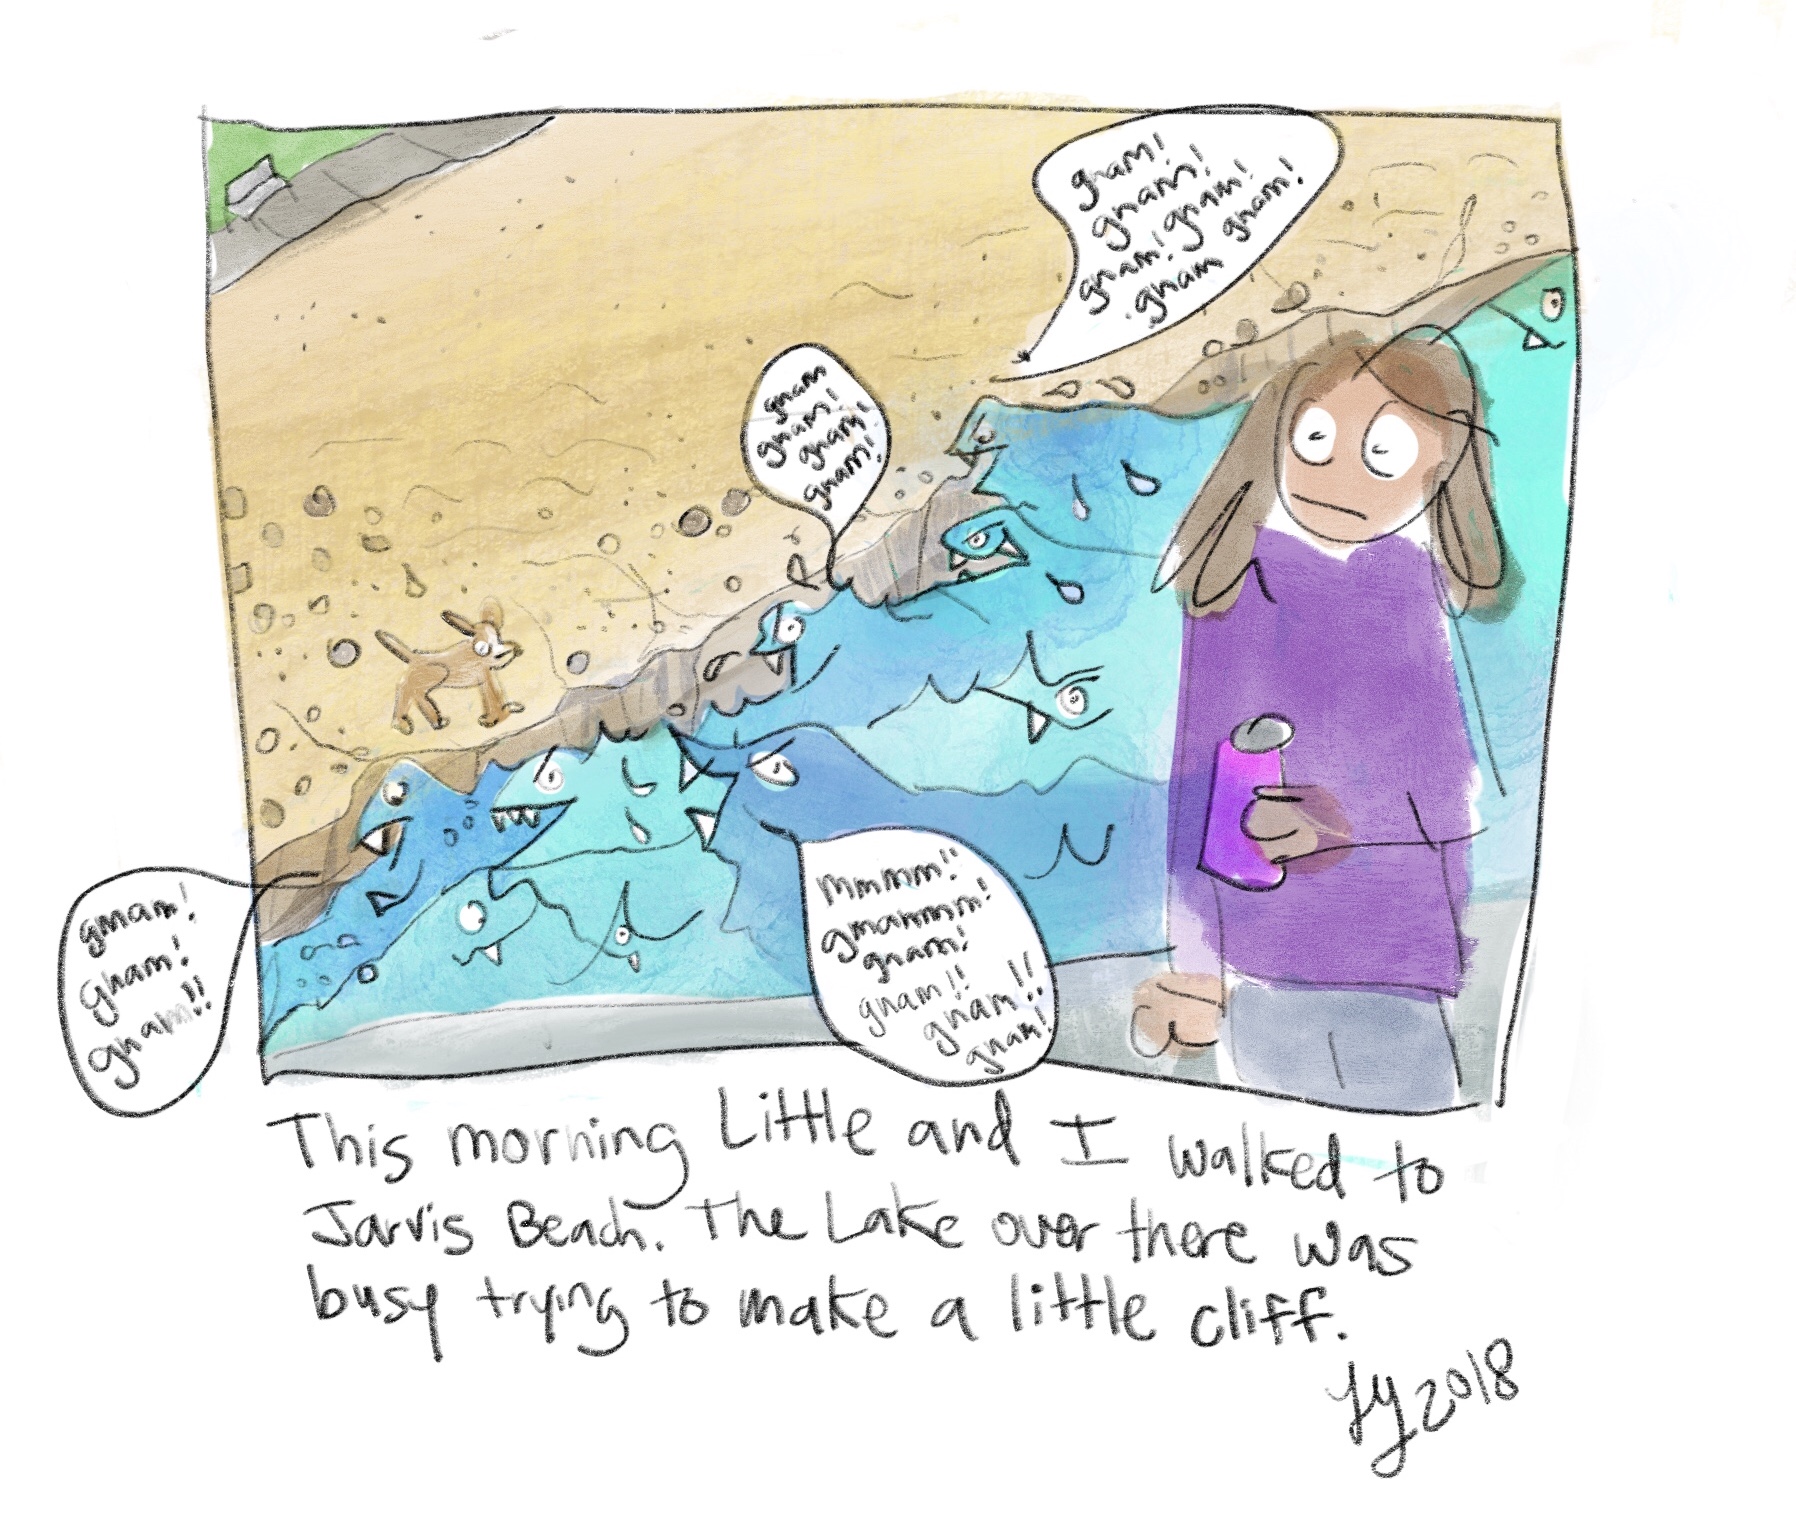 I drew this comic about Lake Michigan. I live in Rogers Park so I see the lake every day. Every day it is up to something new. The other day it was working on a little cliff over by Jarvis.